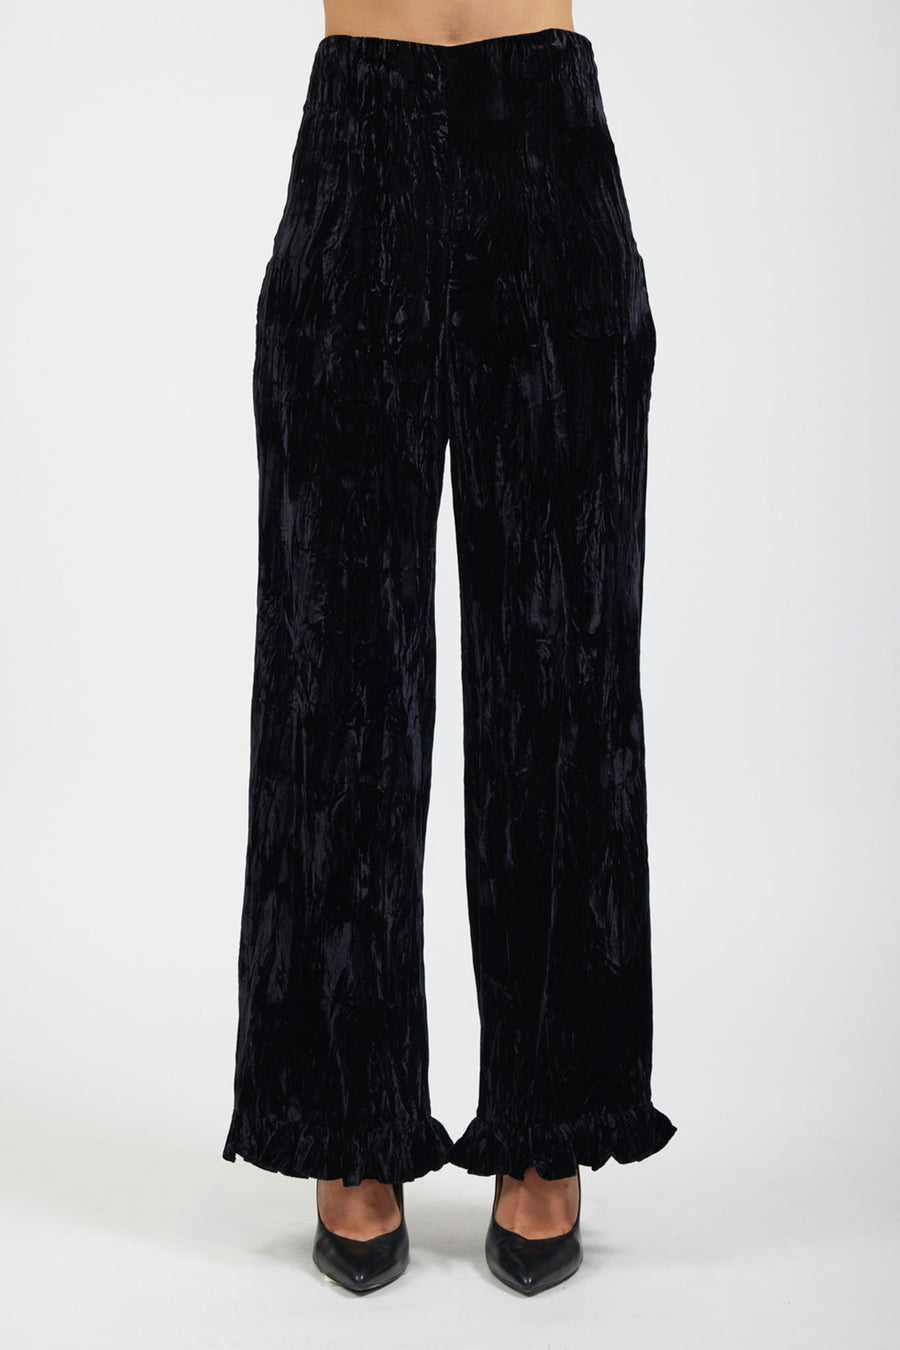 Buy Velvet Solid Emerald Casual Wear Pant for Women - Chique